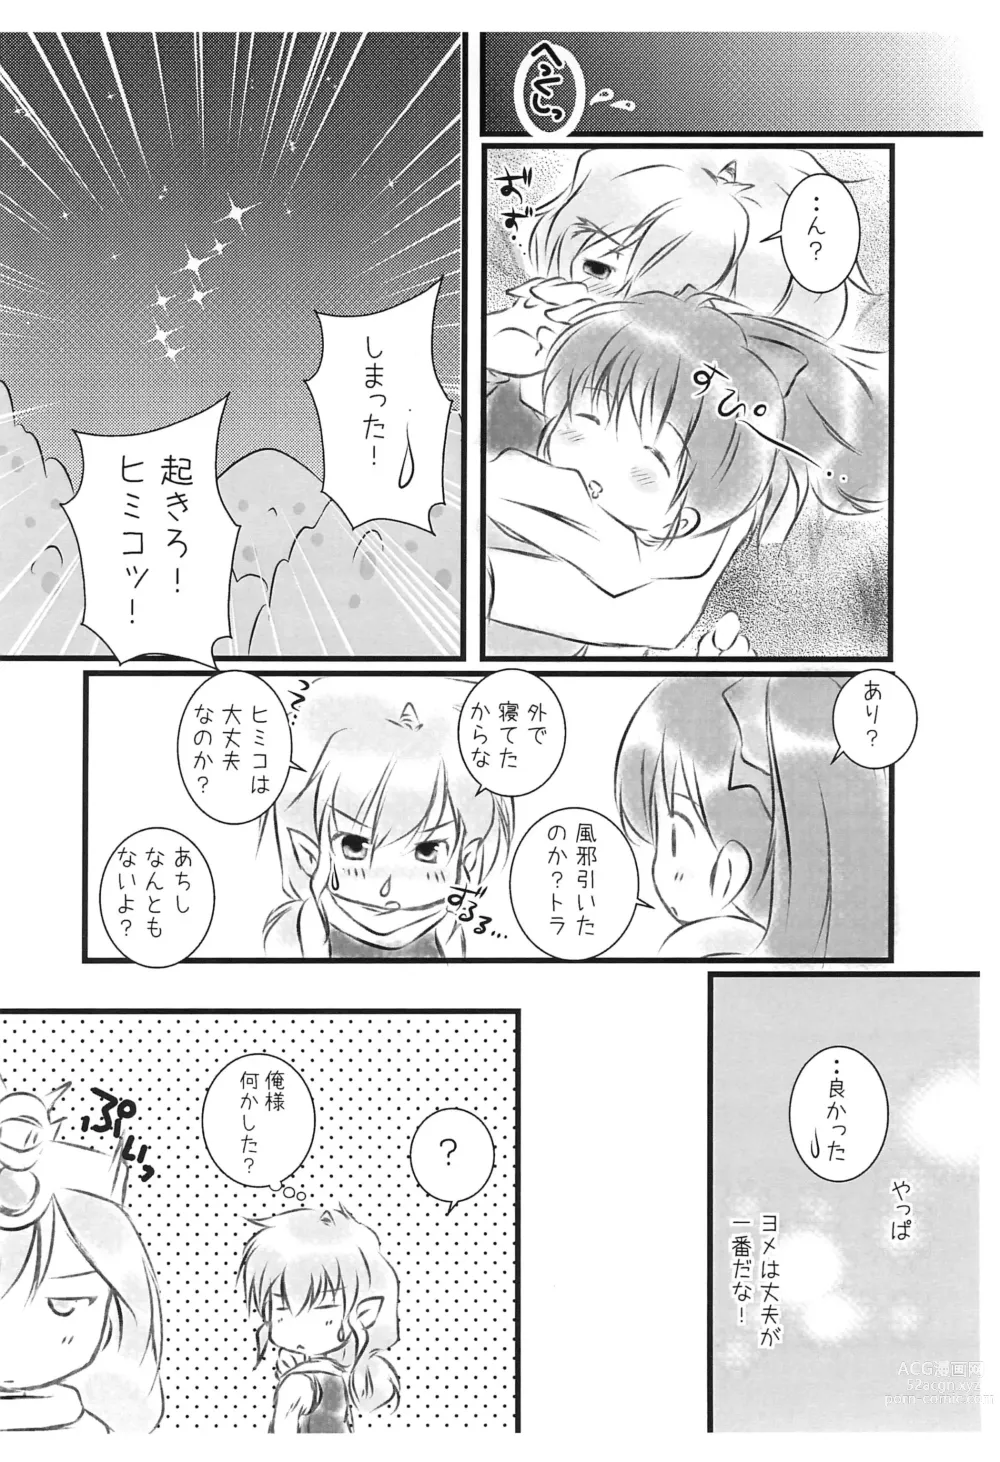 Page 20 of doujinshi STEP UP